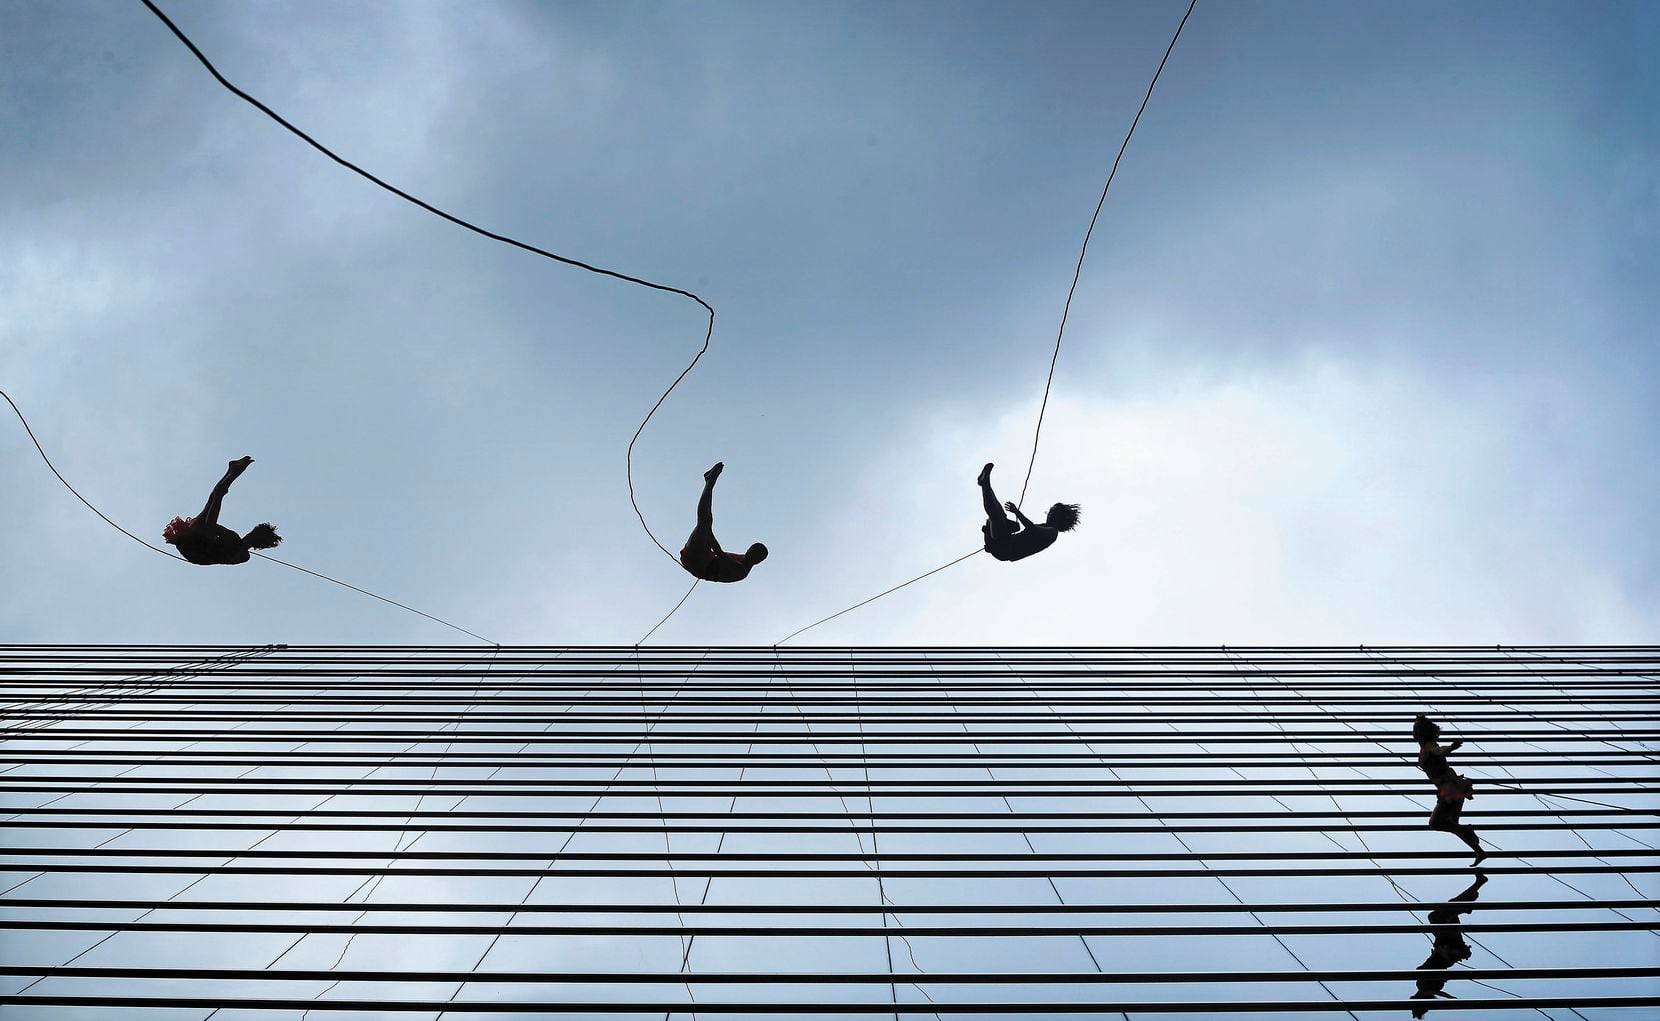 Members of the Bandaloop vertical dance company perform on the side of the KPMG Plaza office tower. The spectacle was part of a groundbreaking ceremony for Hall Arts Hotel and Residences, a 25-story downtown Dallas tower in the Arts District.